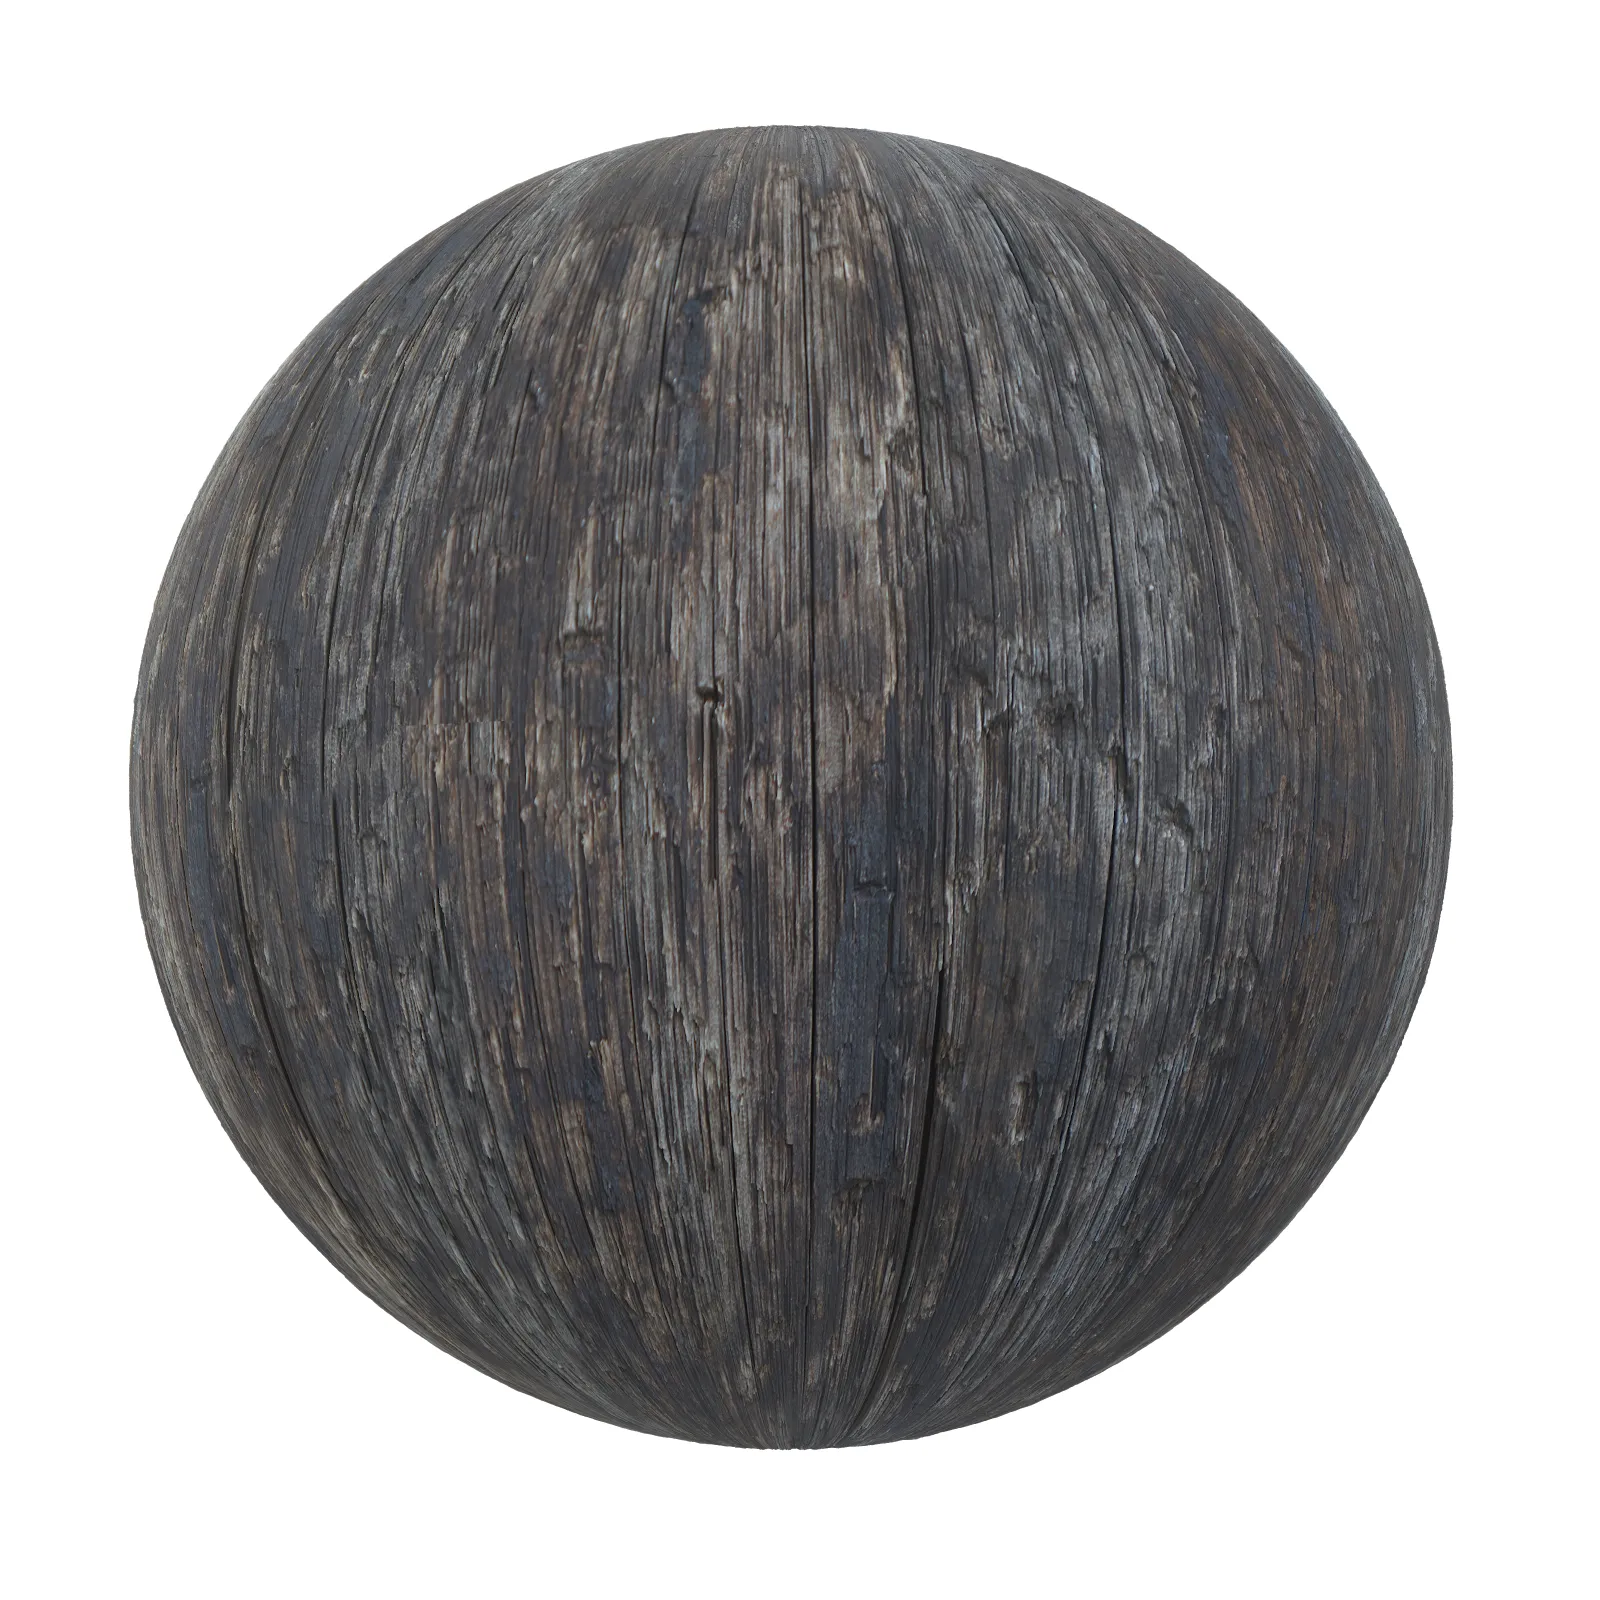 TEXTURES – WOOD – Old Wood 17